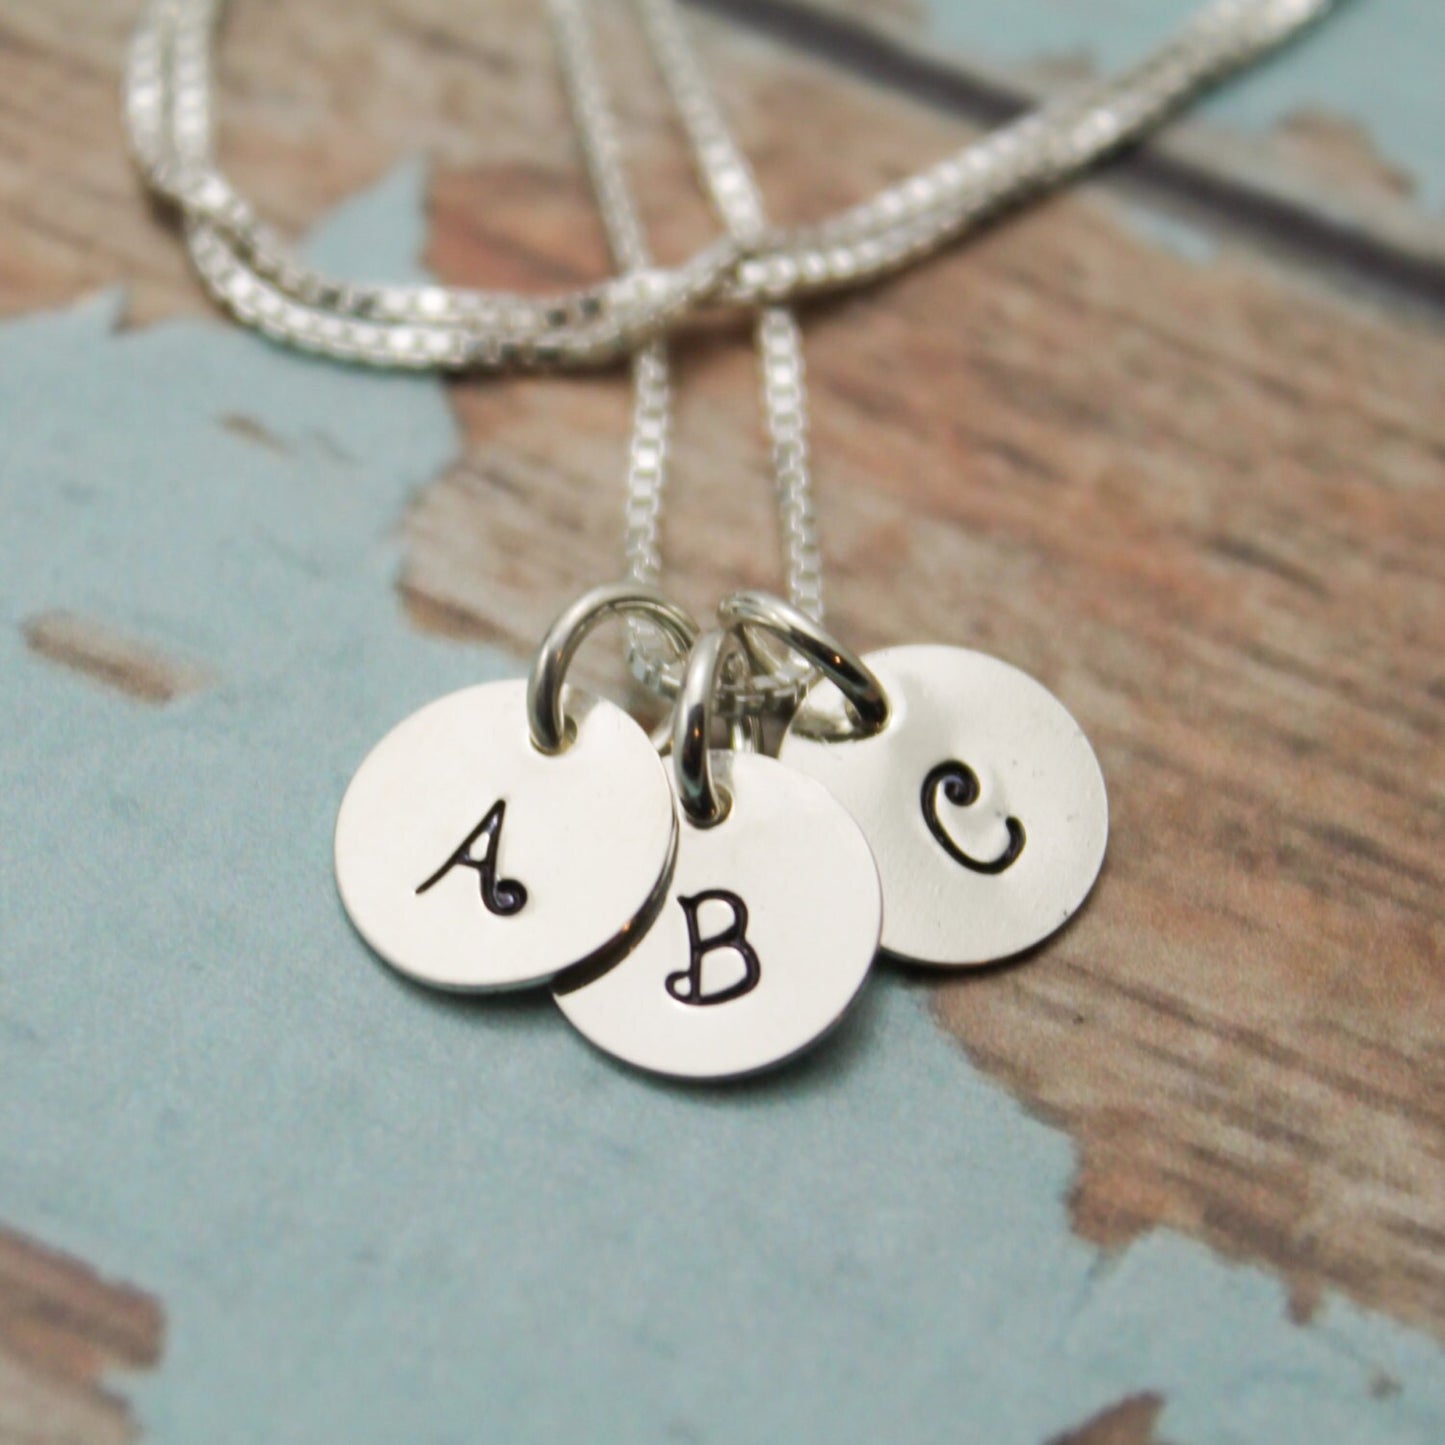 Three (3) Tiny Initial Sterling Silver Necklace Personalized Hand Stamped Jewelry